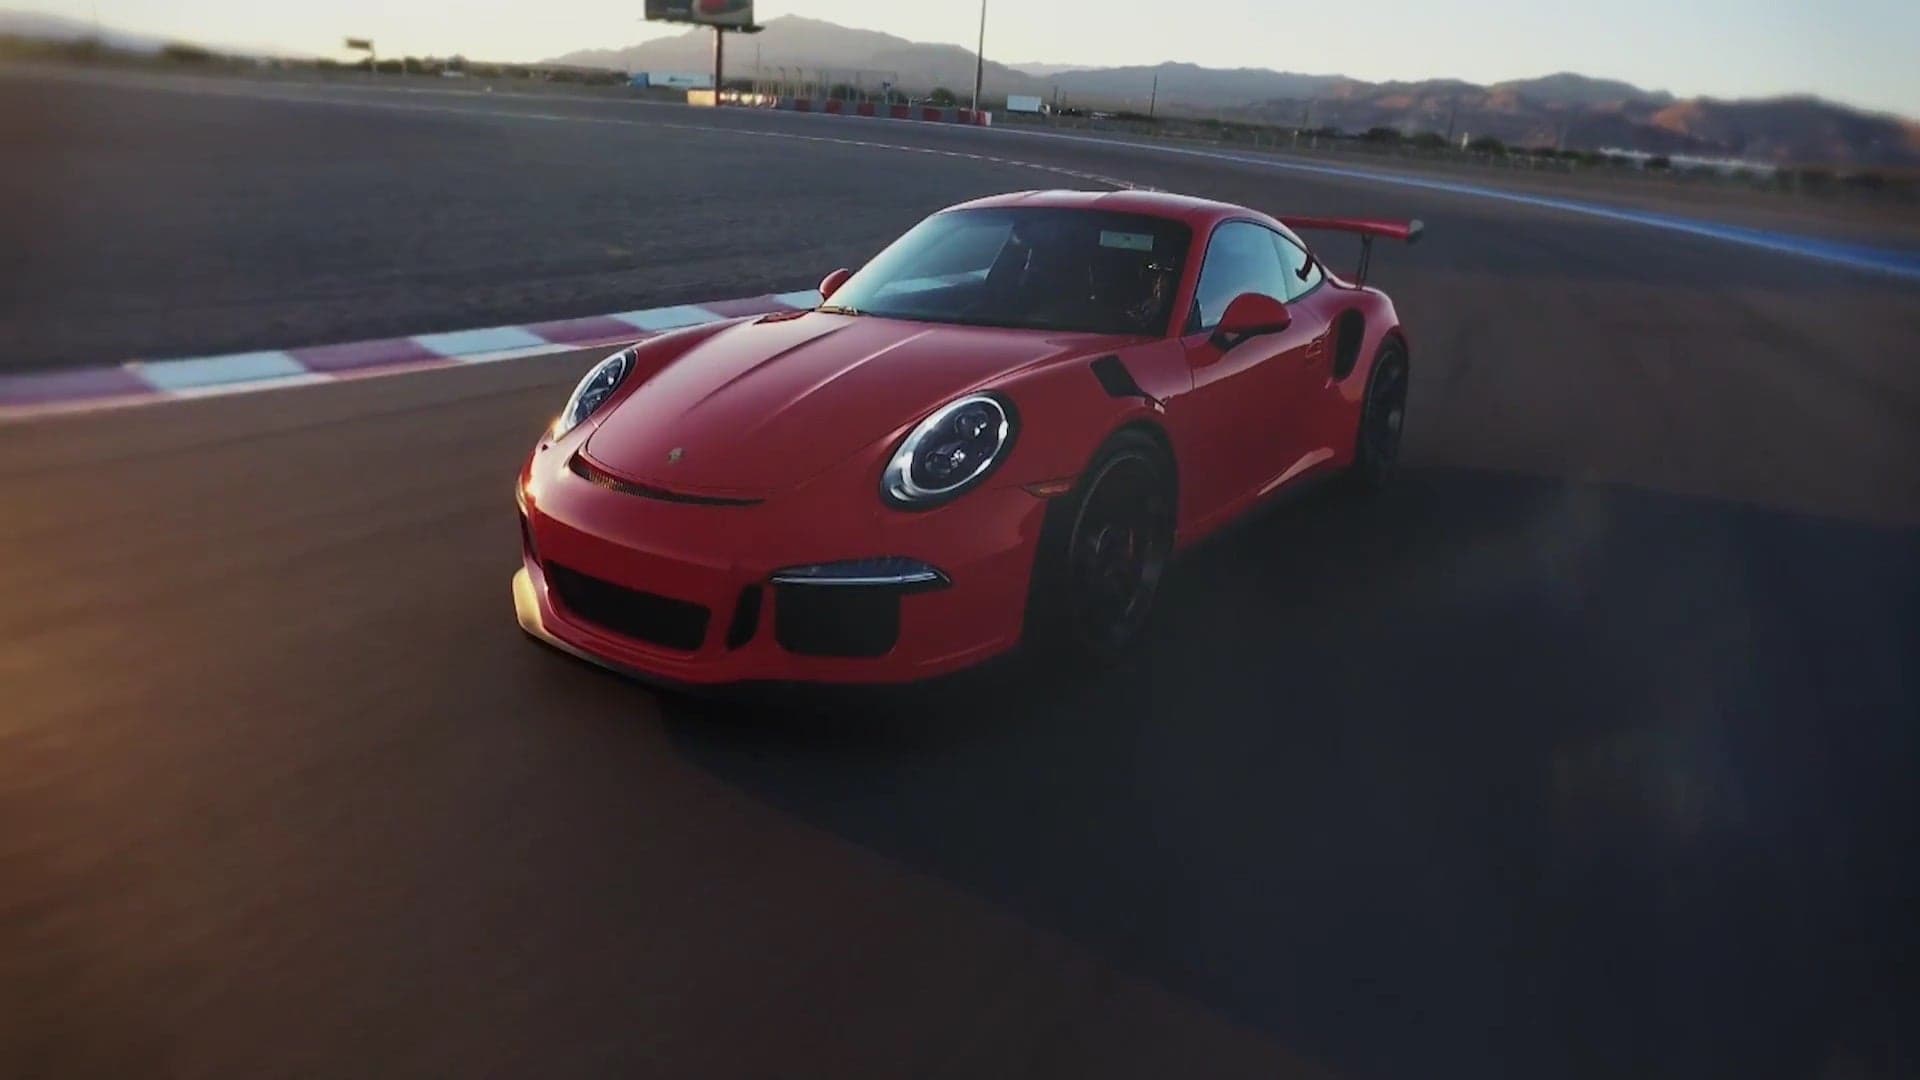 The CEO Of Exotics Racing Has A Las Vegas Love Affair With A 991 GT3 RS